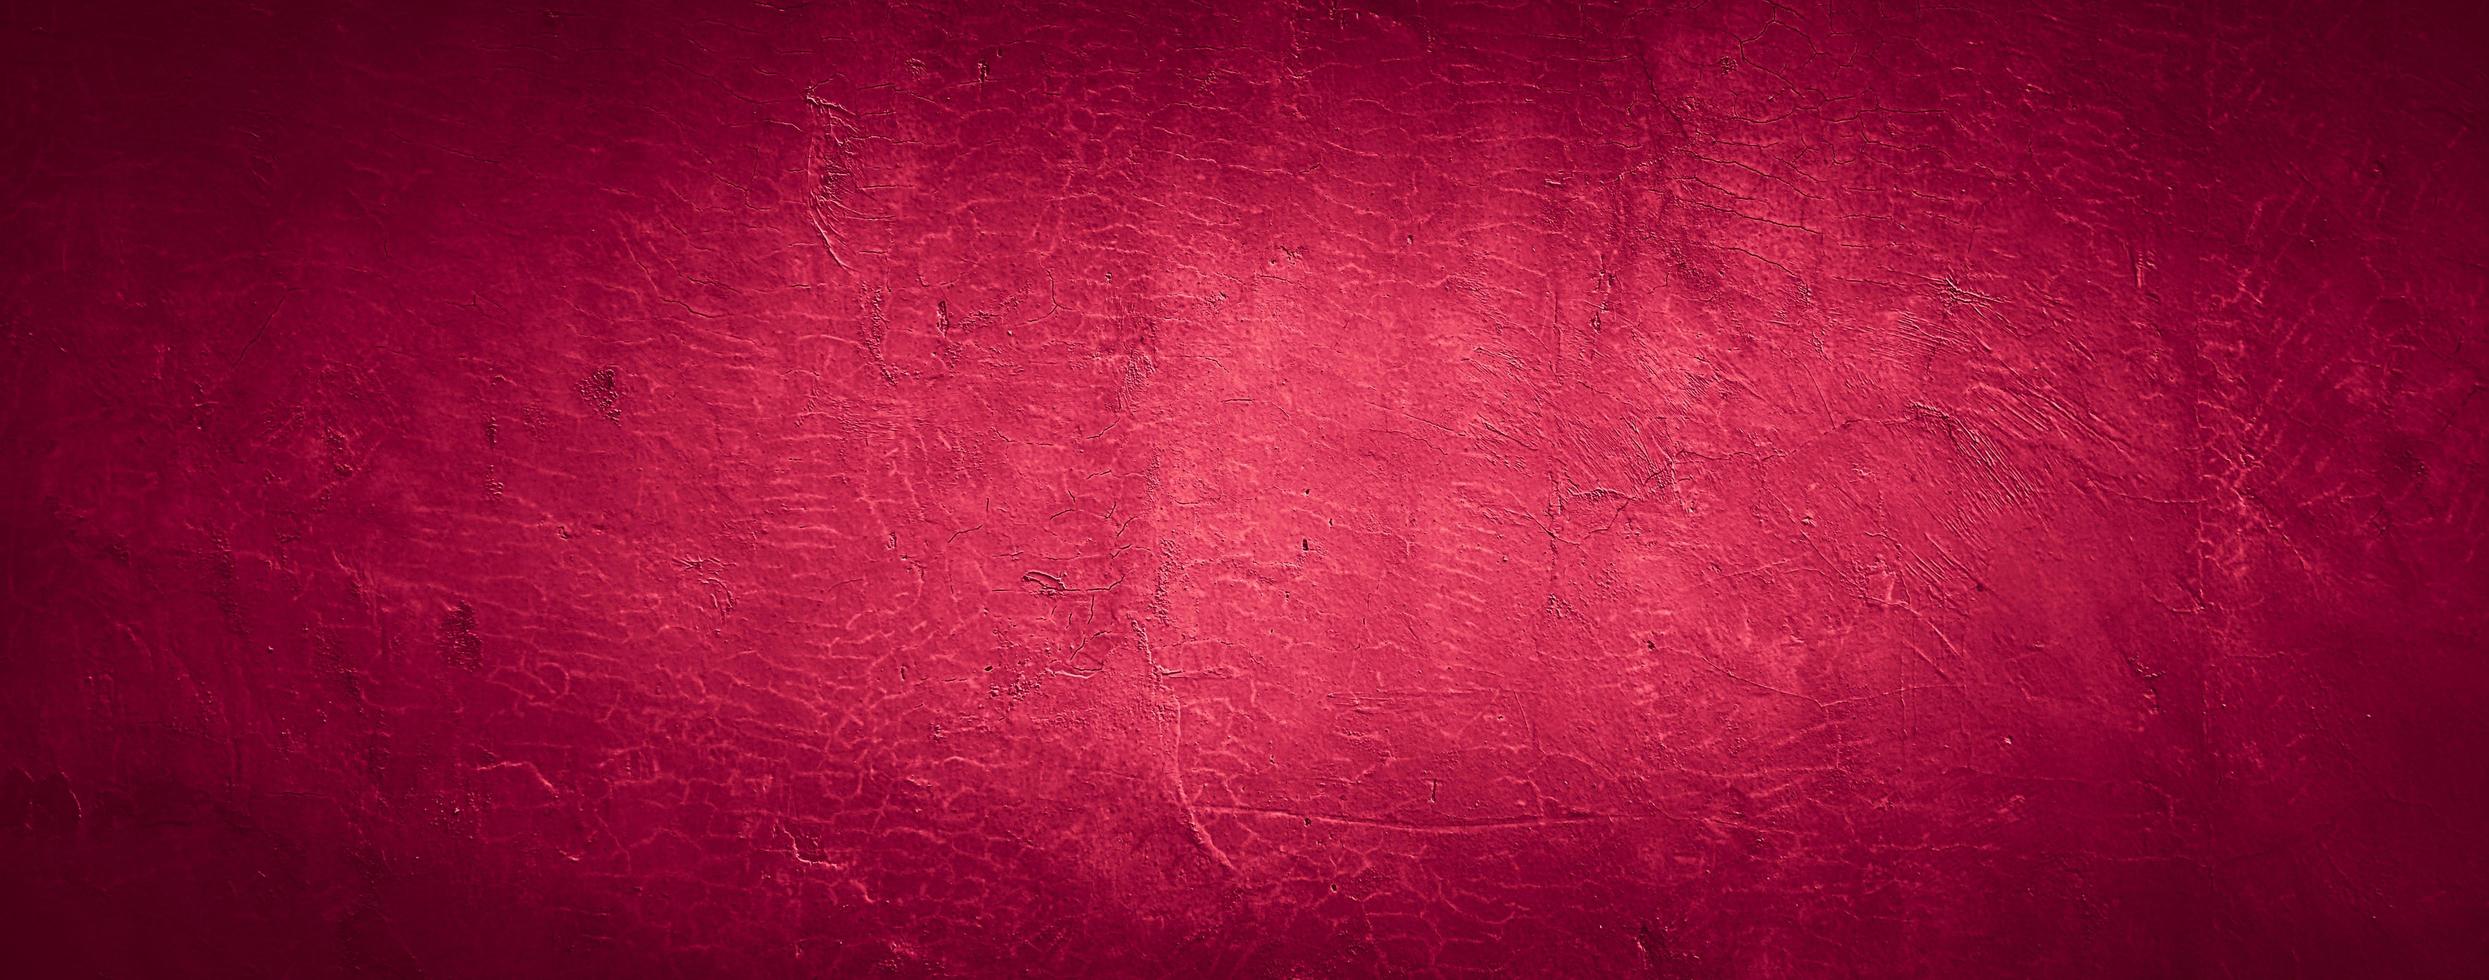 red grungy abstract cement concrete wall texture background photo